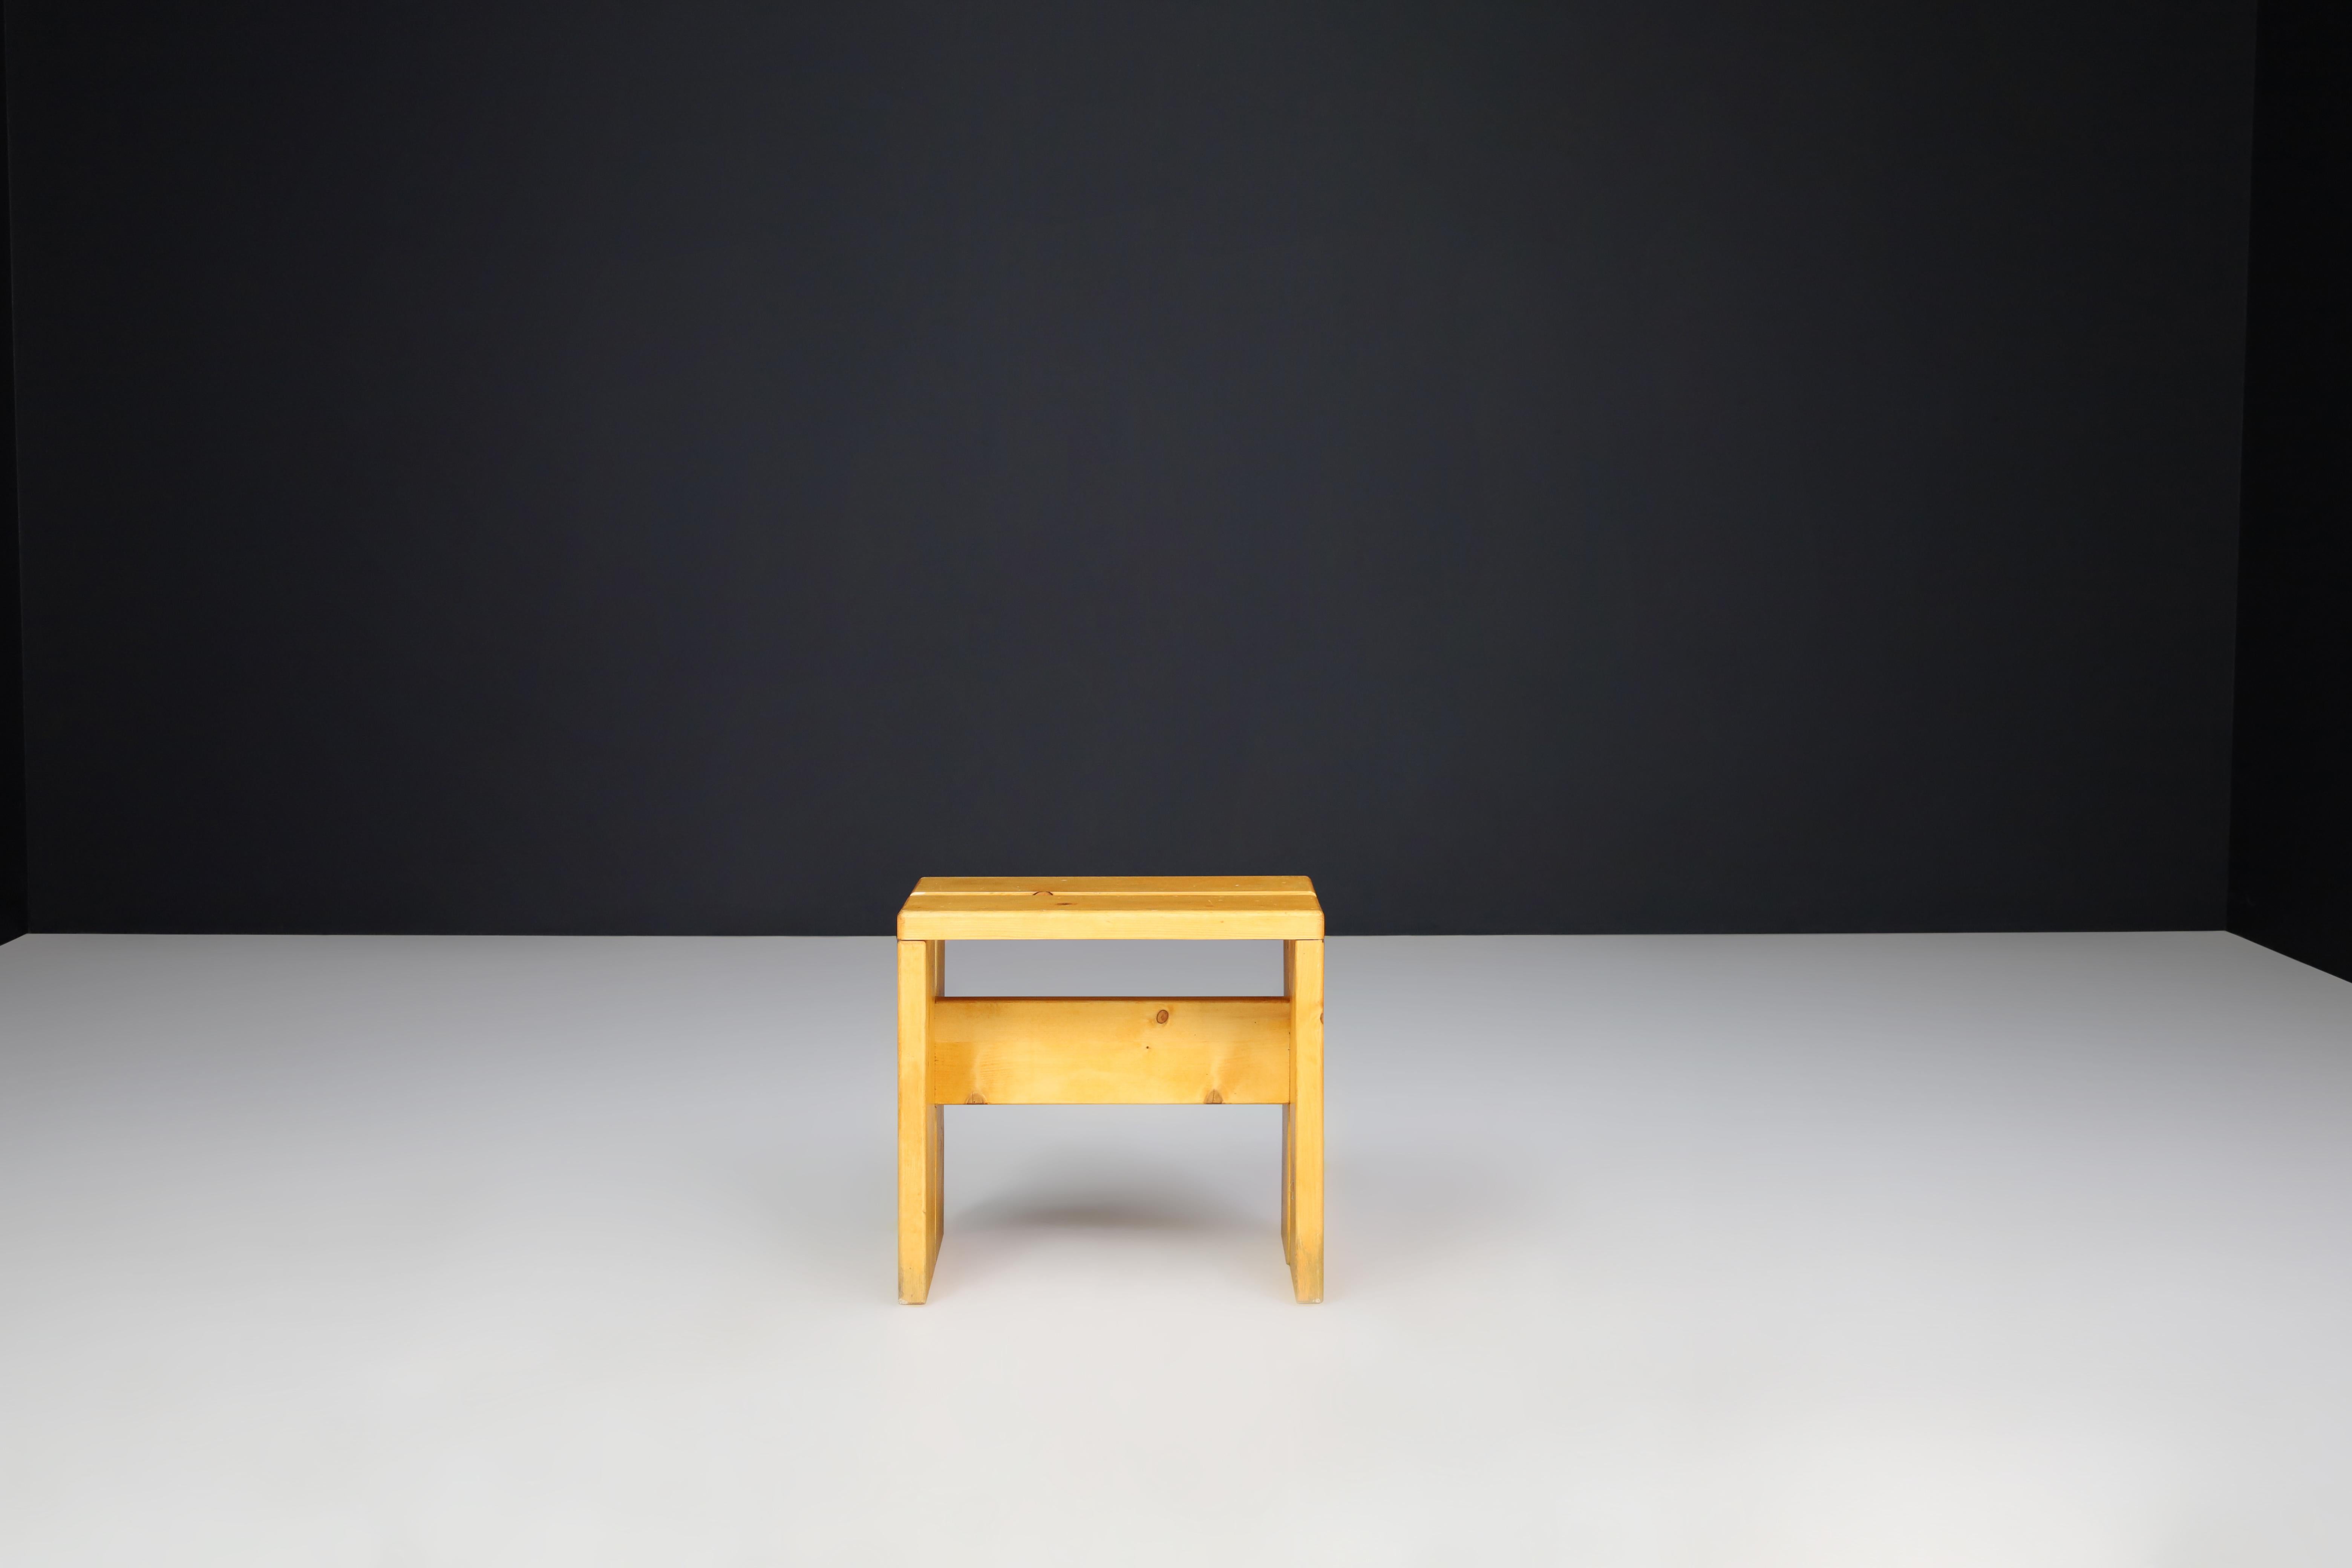 Pine Wood Charlotte Perriand Stools for Les Arcs, France, 1960s For Sale 2